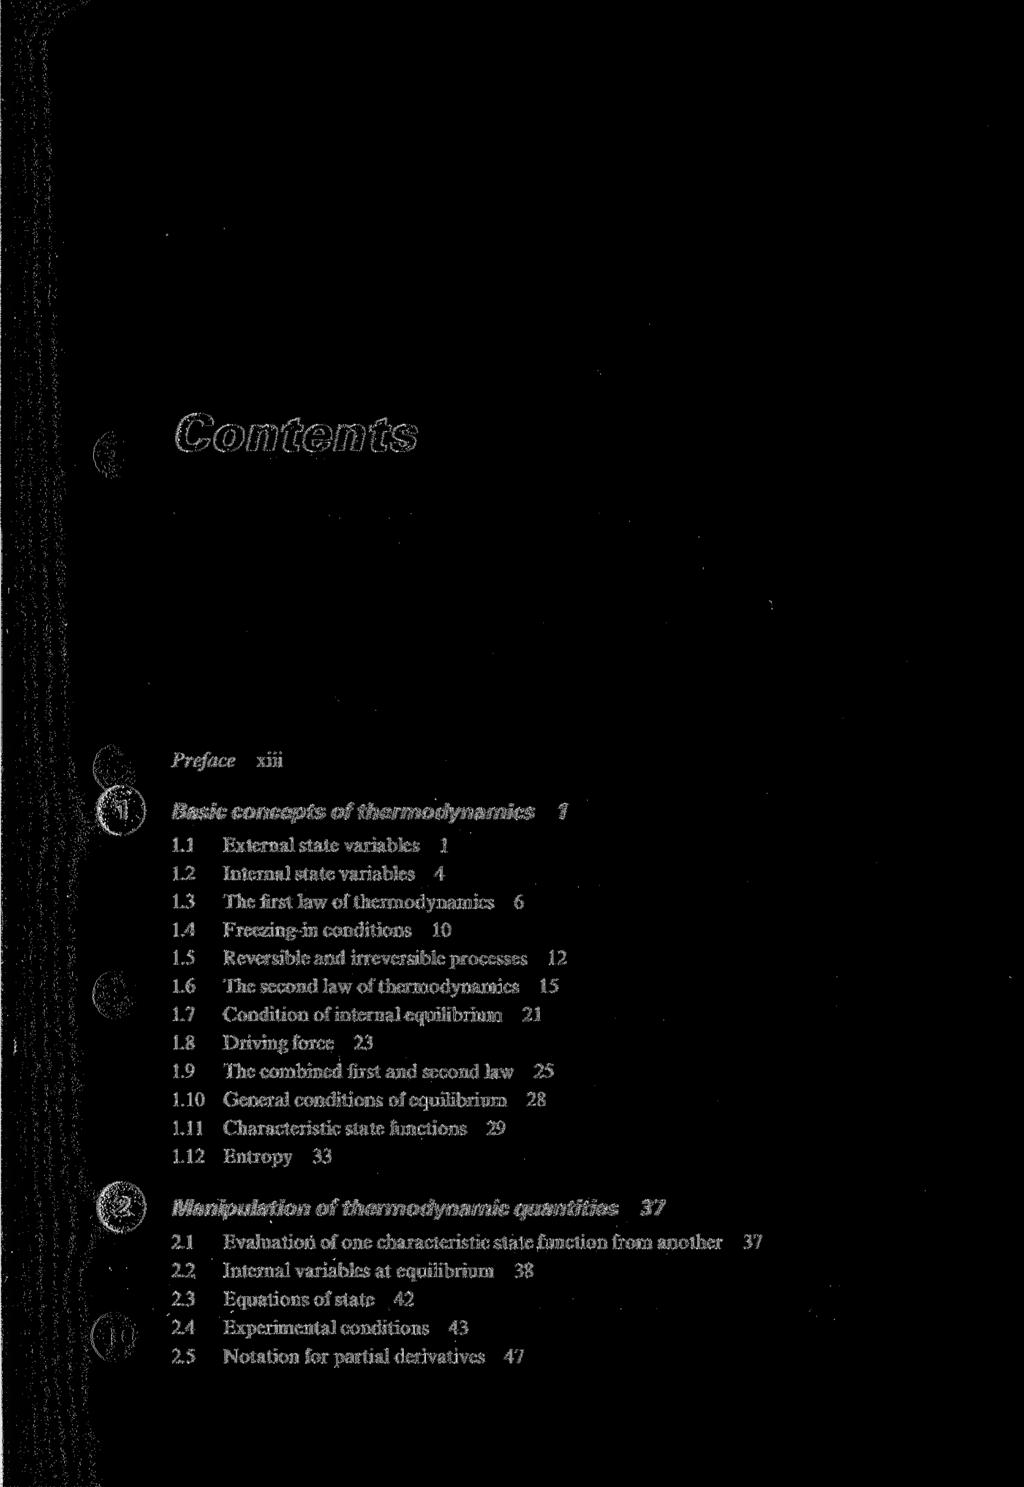 Contents Preface xiii Basic concepts of thermodynamics 1 1.1 External State variables 1 1.2 Internal State variables 4 1.3 The first law of thermodynamics 6 1.4 Freezing-in conditions 10 1.